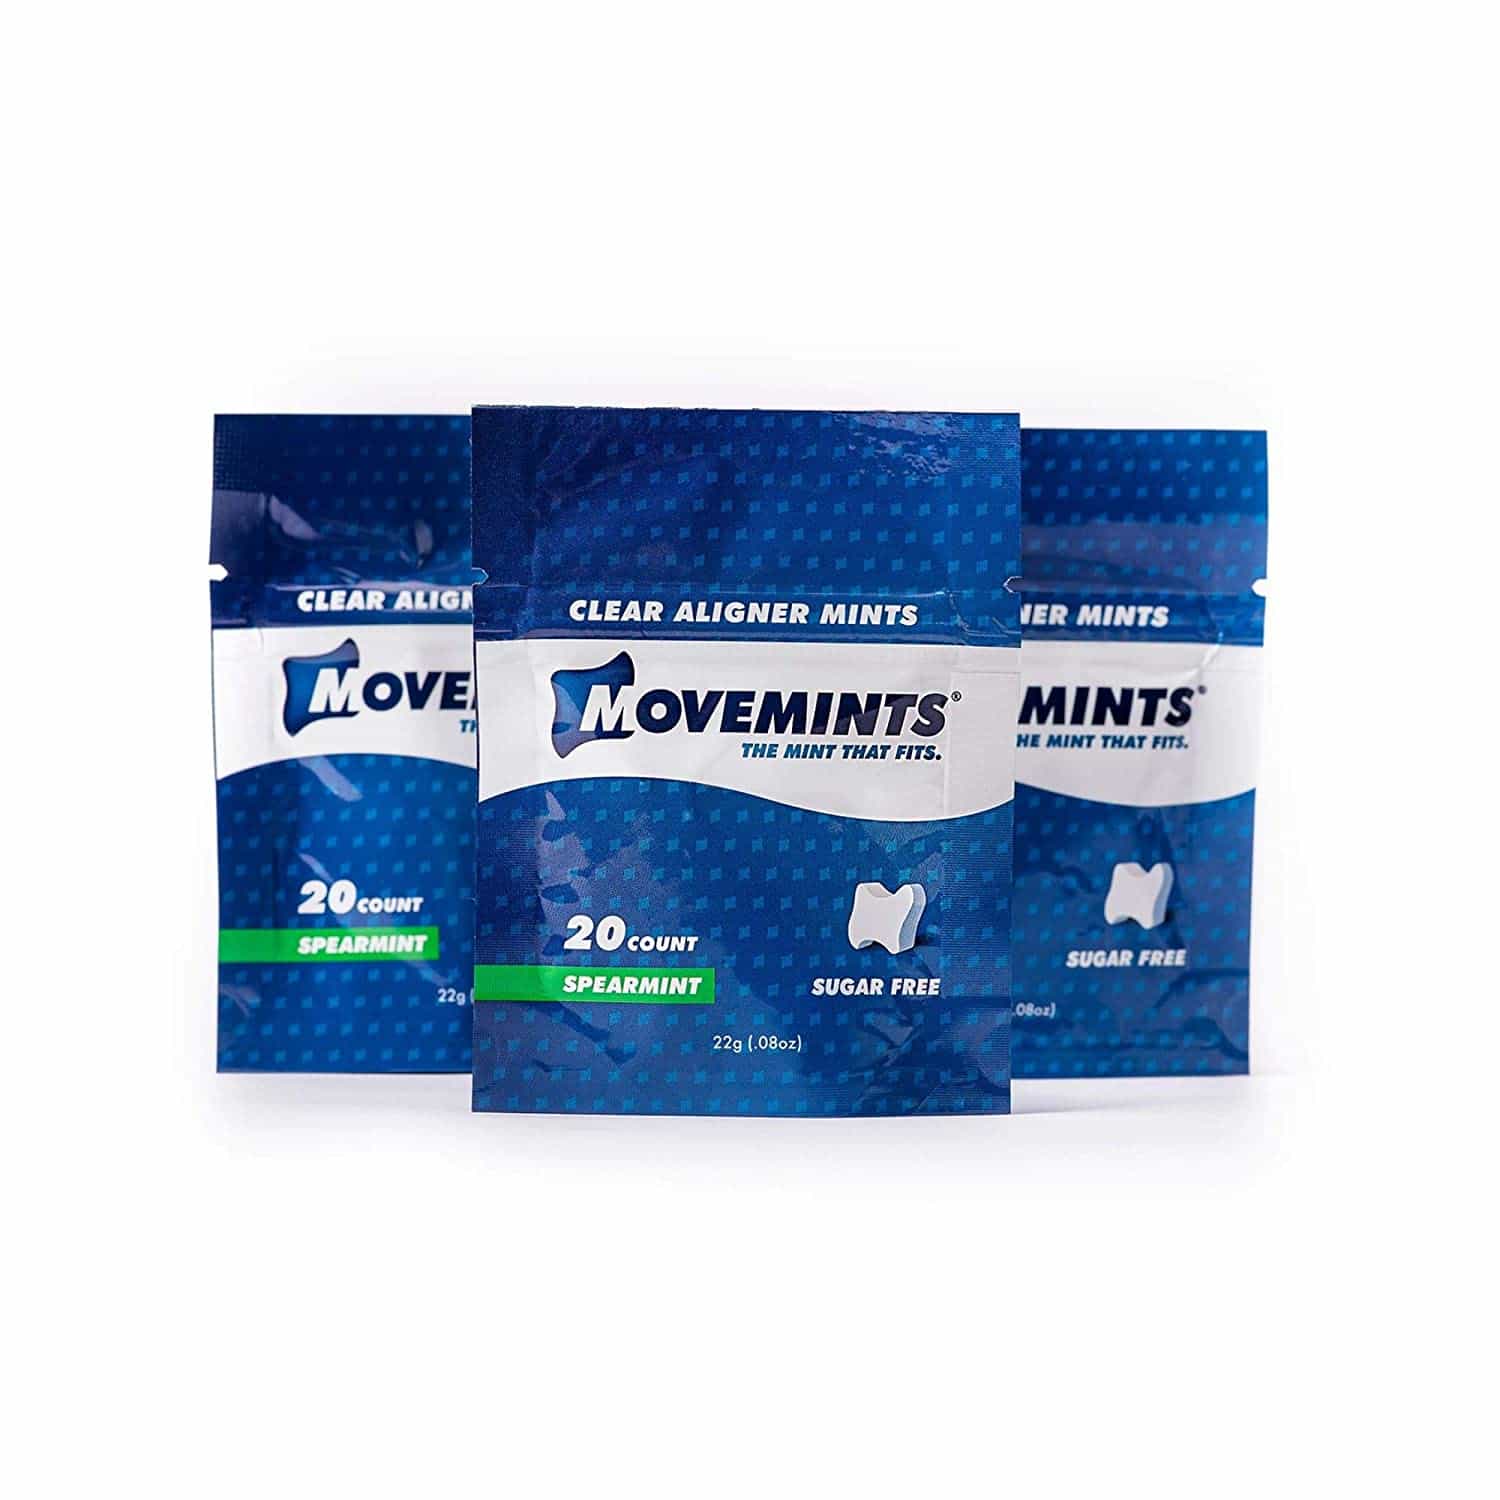 Three packages of Movemints clear aligner mints